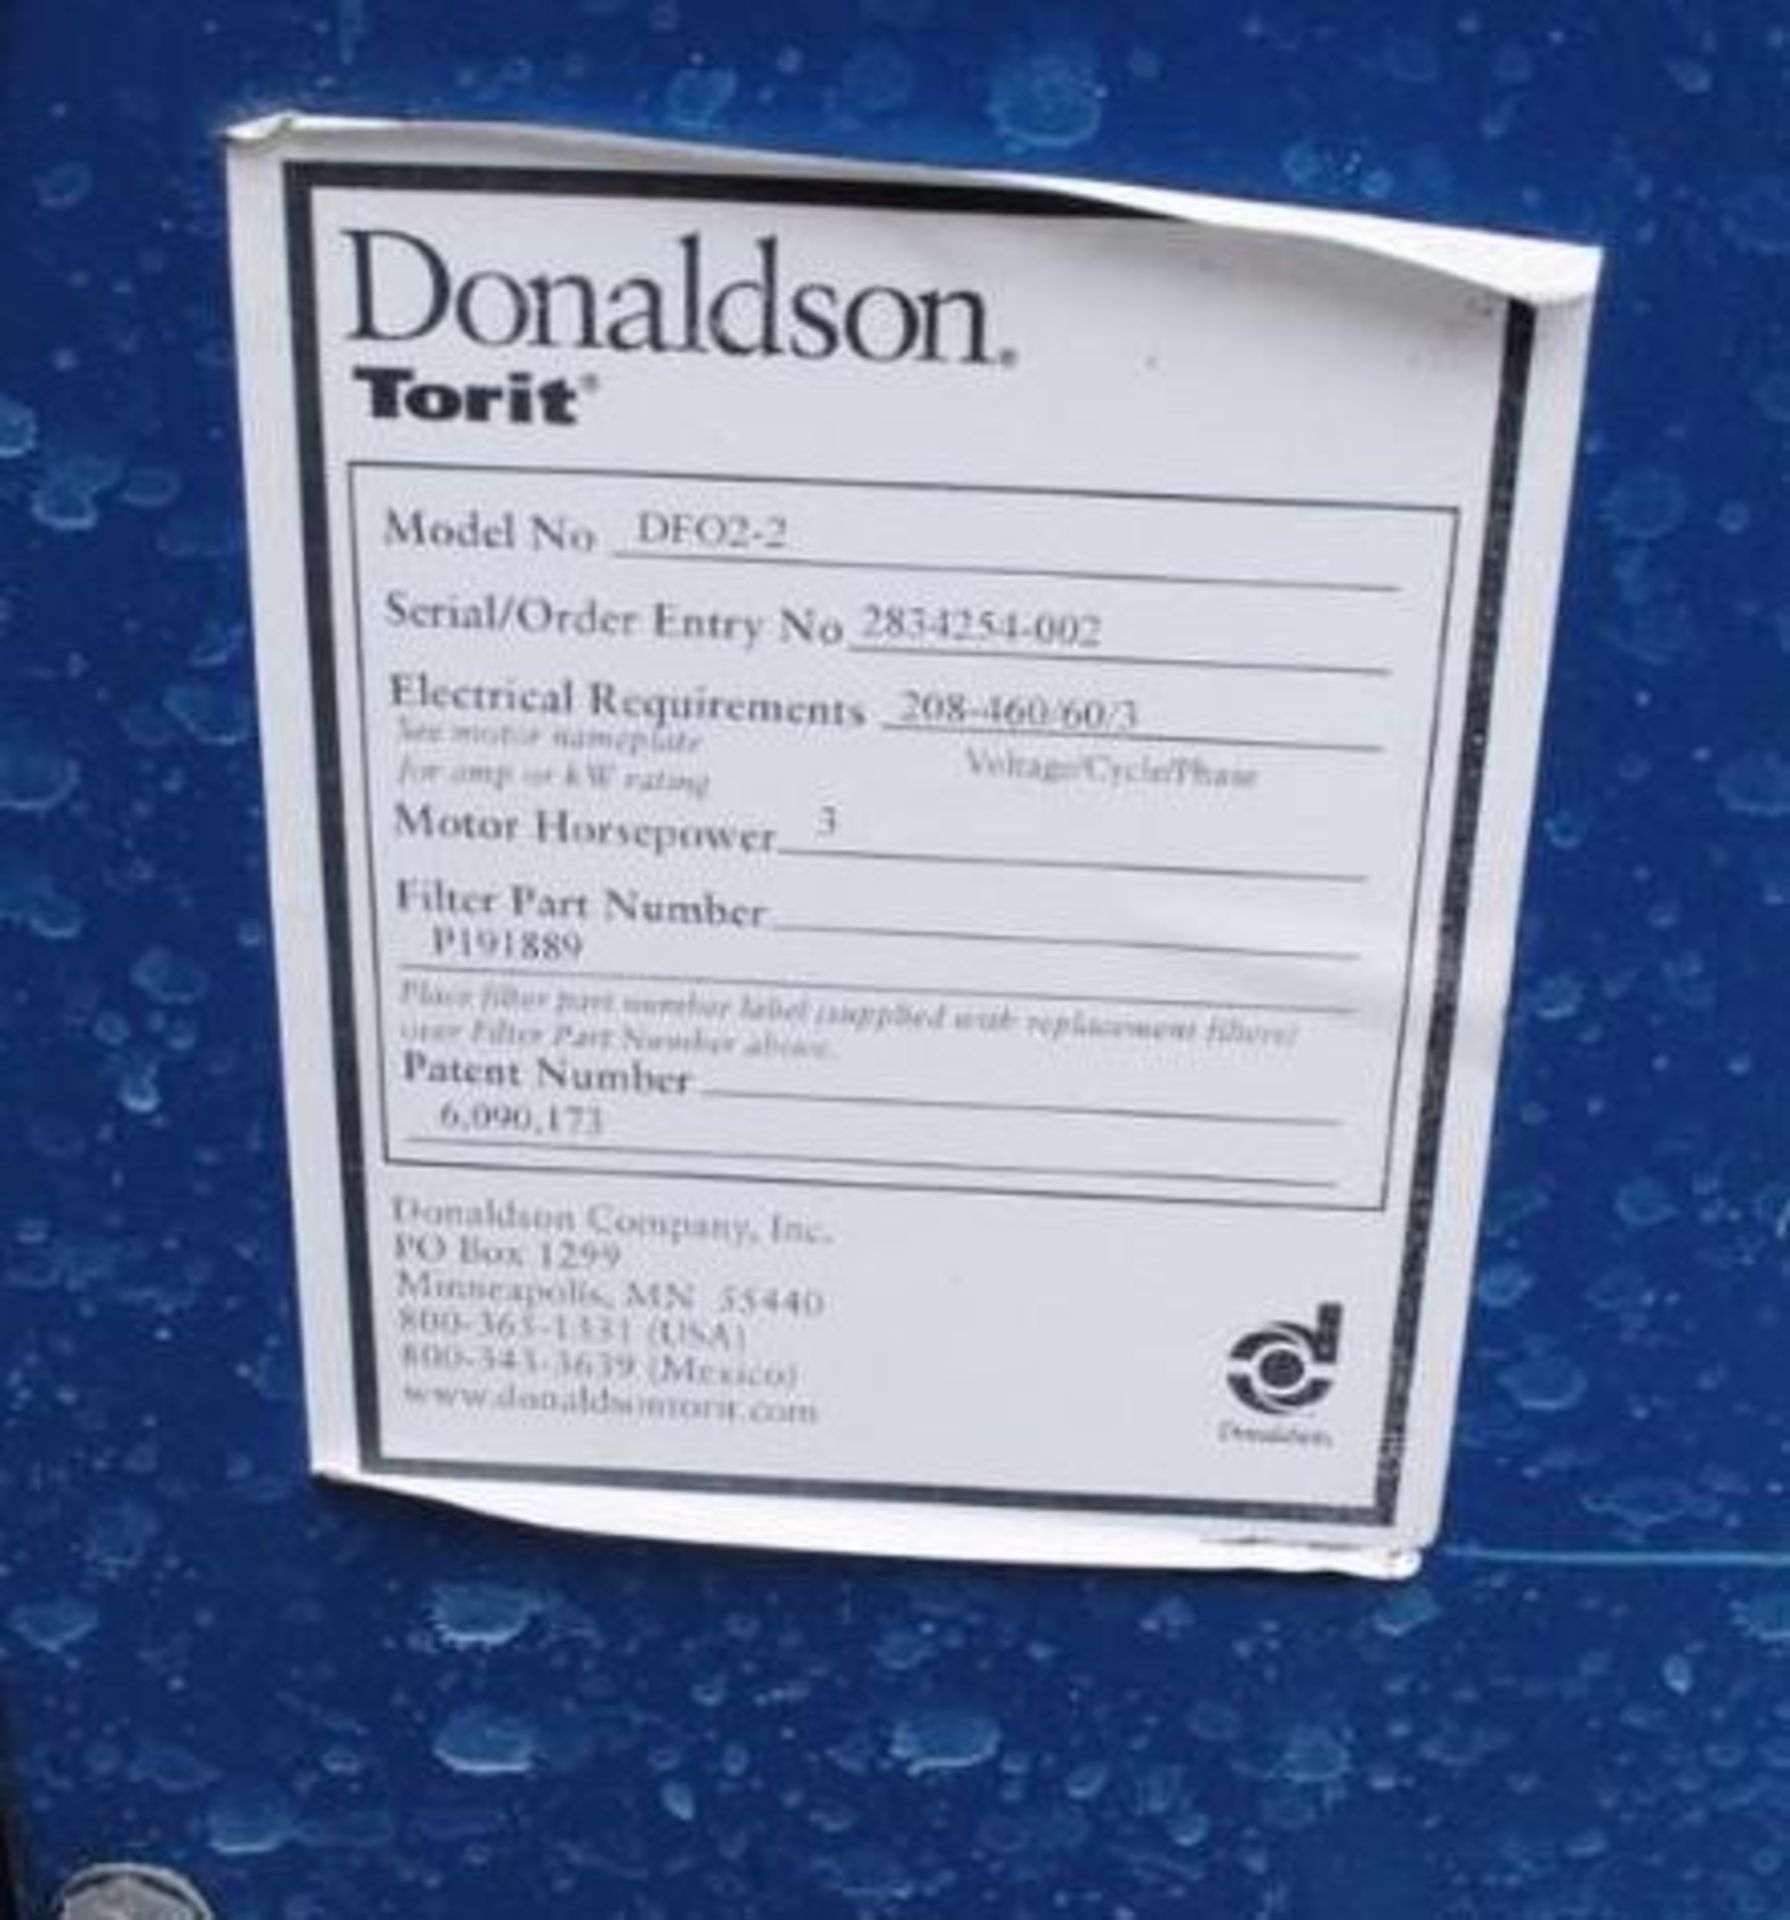 Donaldson Torit Dust Collector - Image 3 of 3